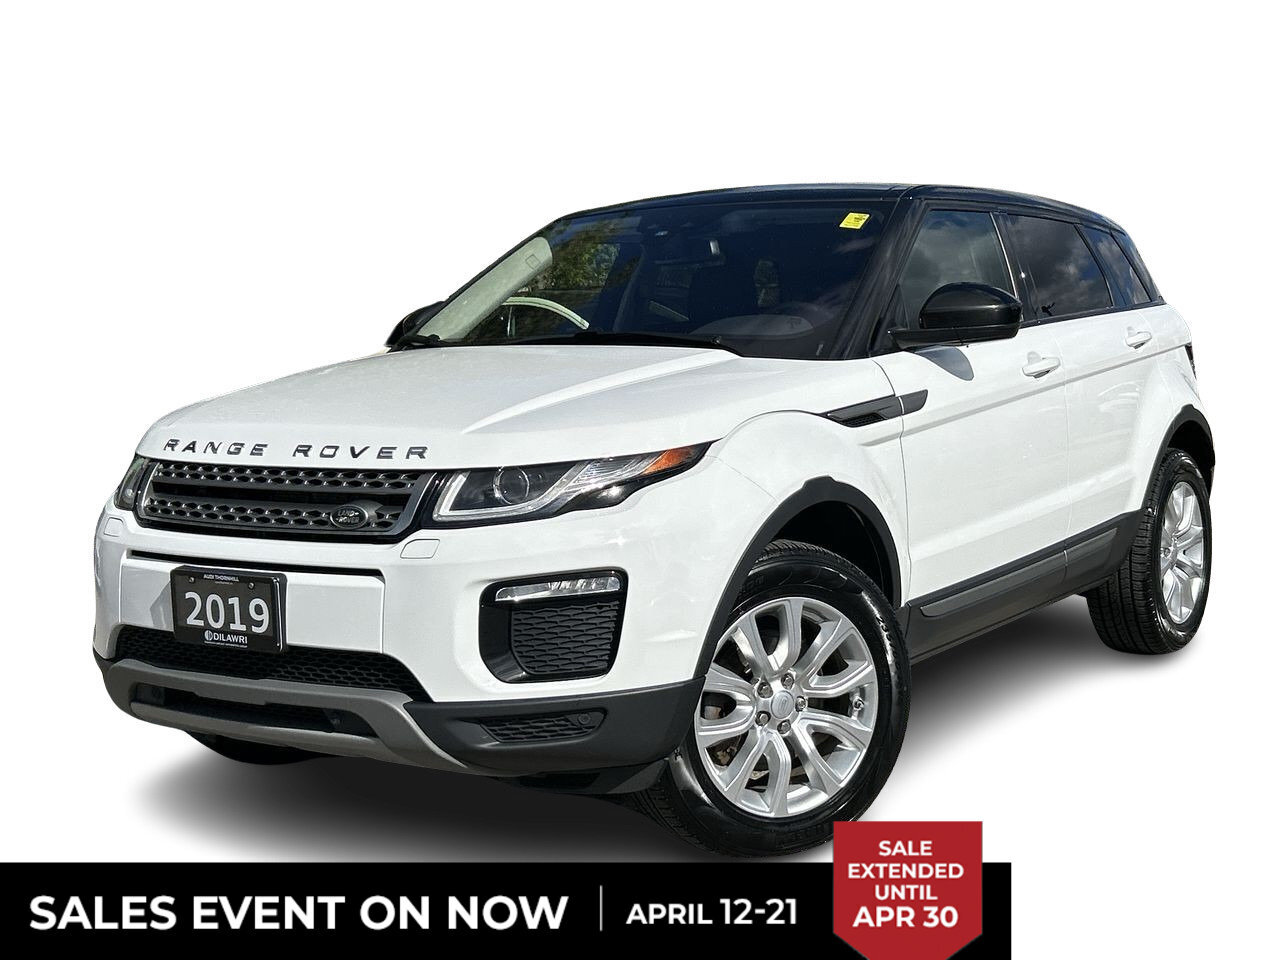 2019 Land Rover Range Rover Evoque 237hp SE | 1st Payment on Us April 12th - 30th | N